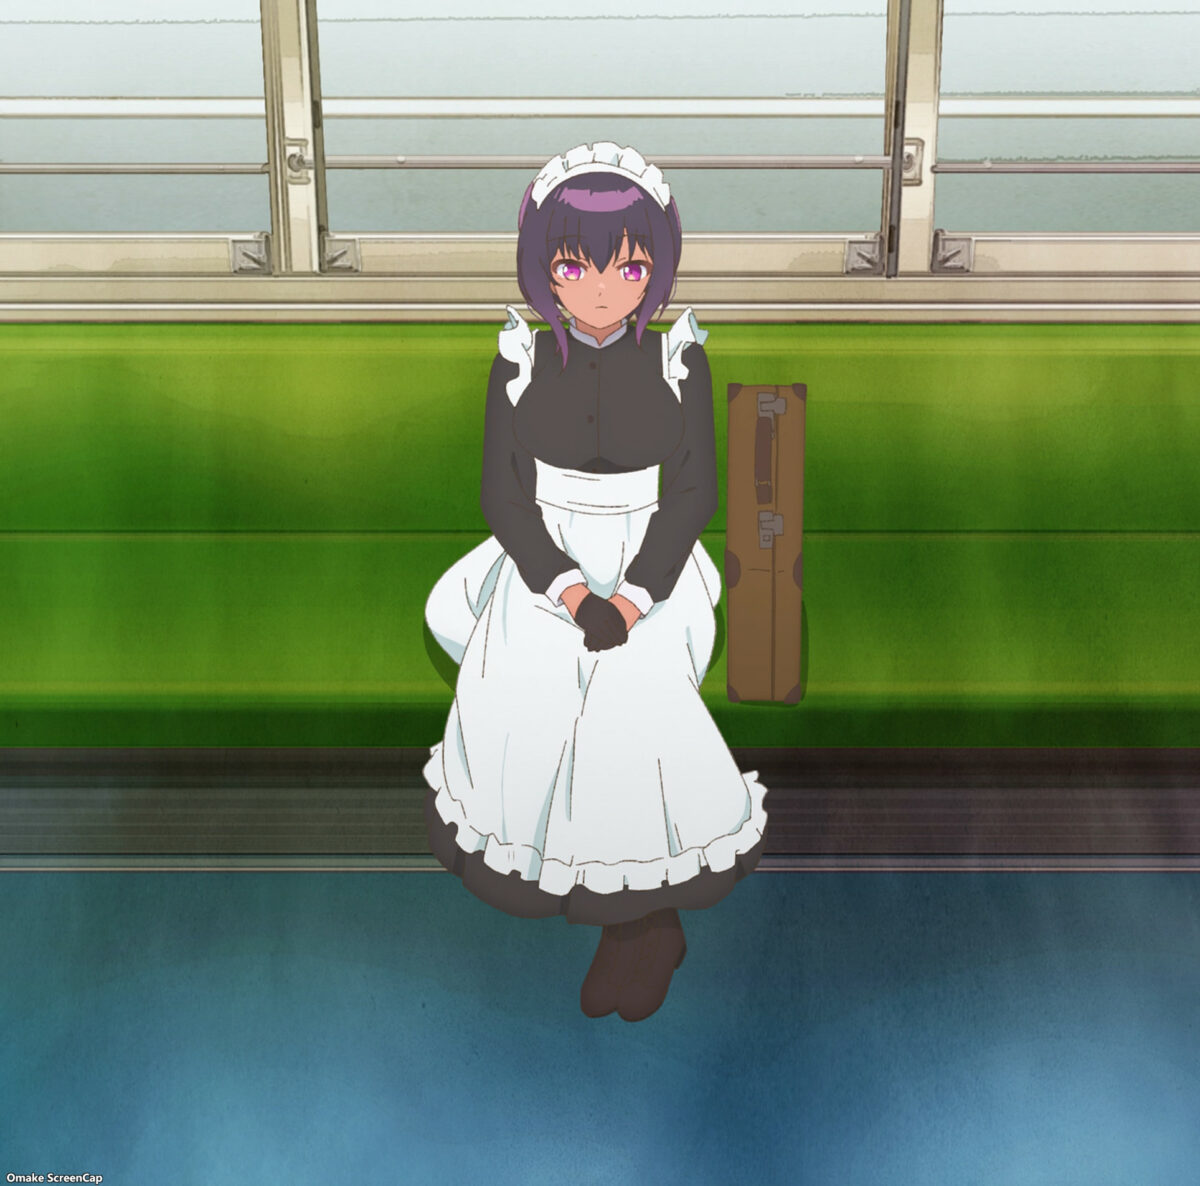 The Maid I Hired Recently Is Mysterious Episode 1 Lilith Rides Streetcar